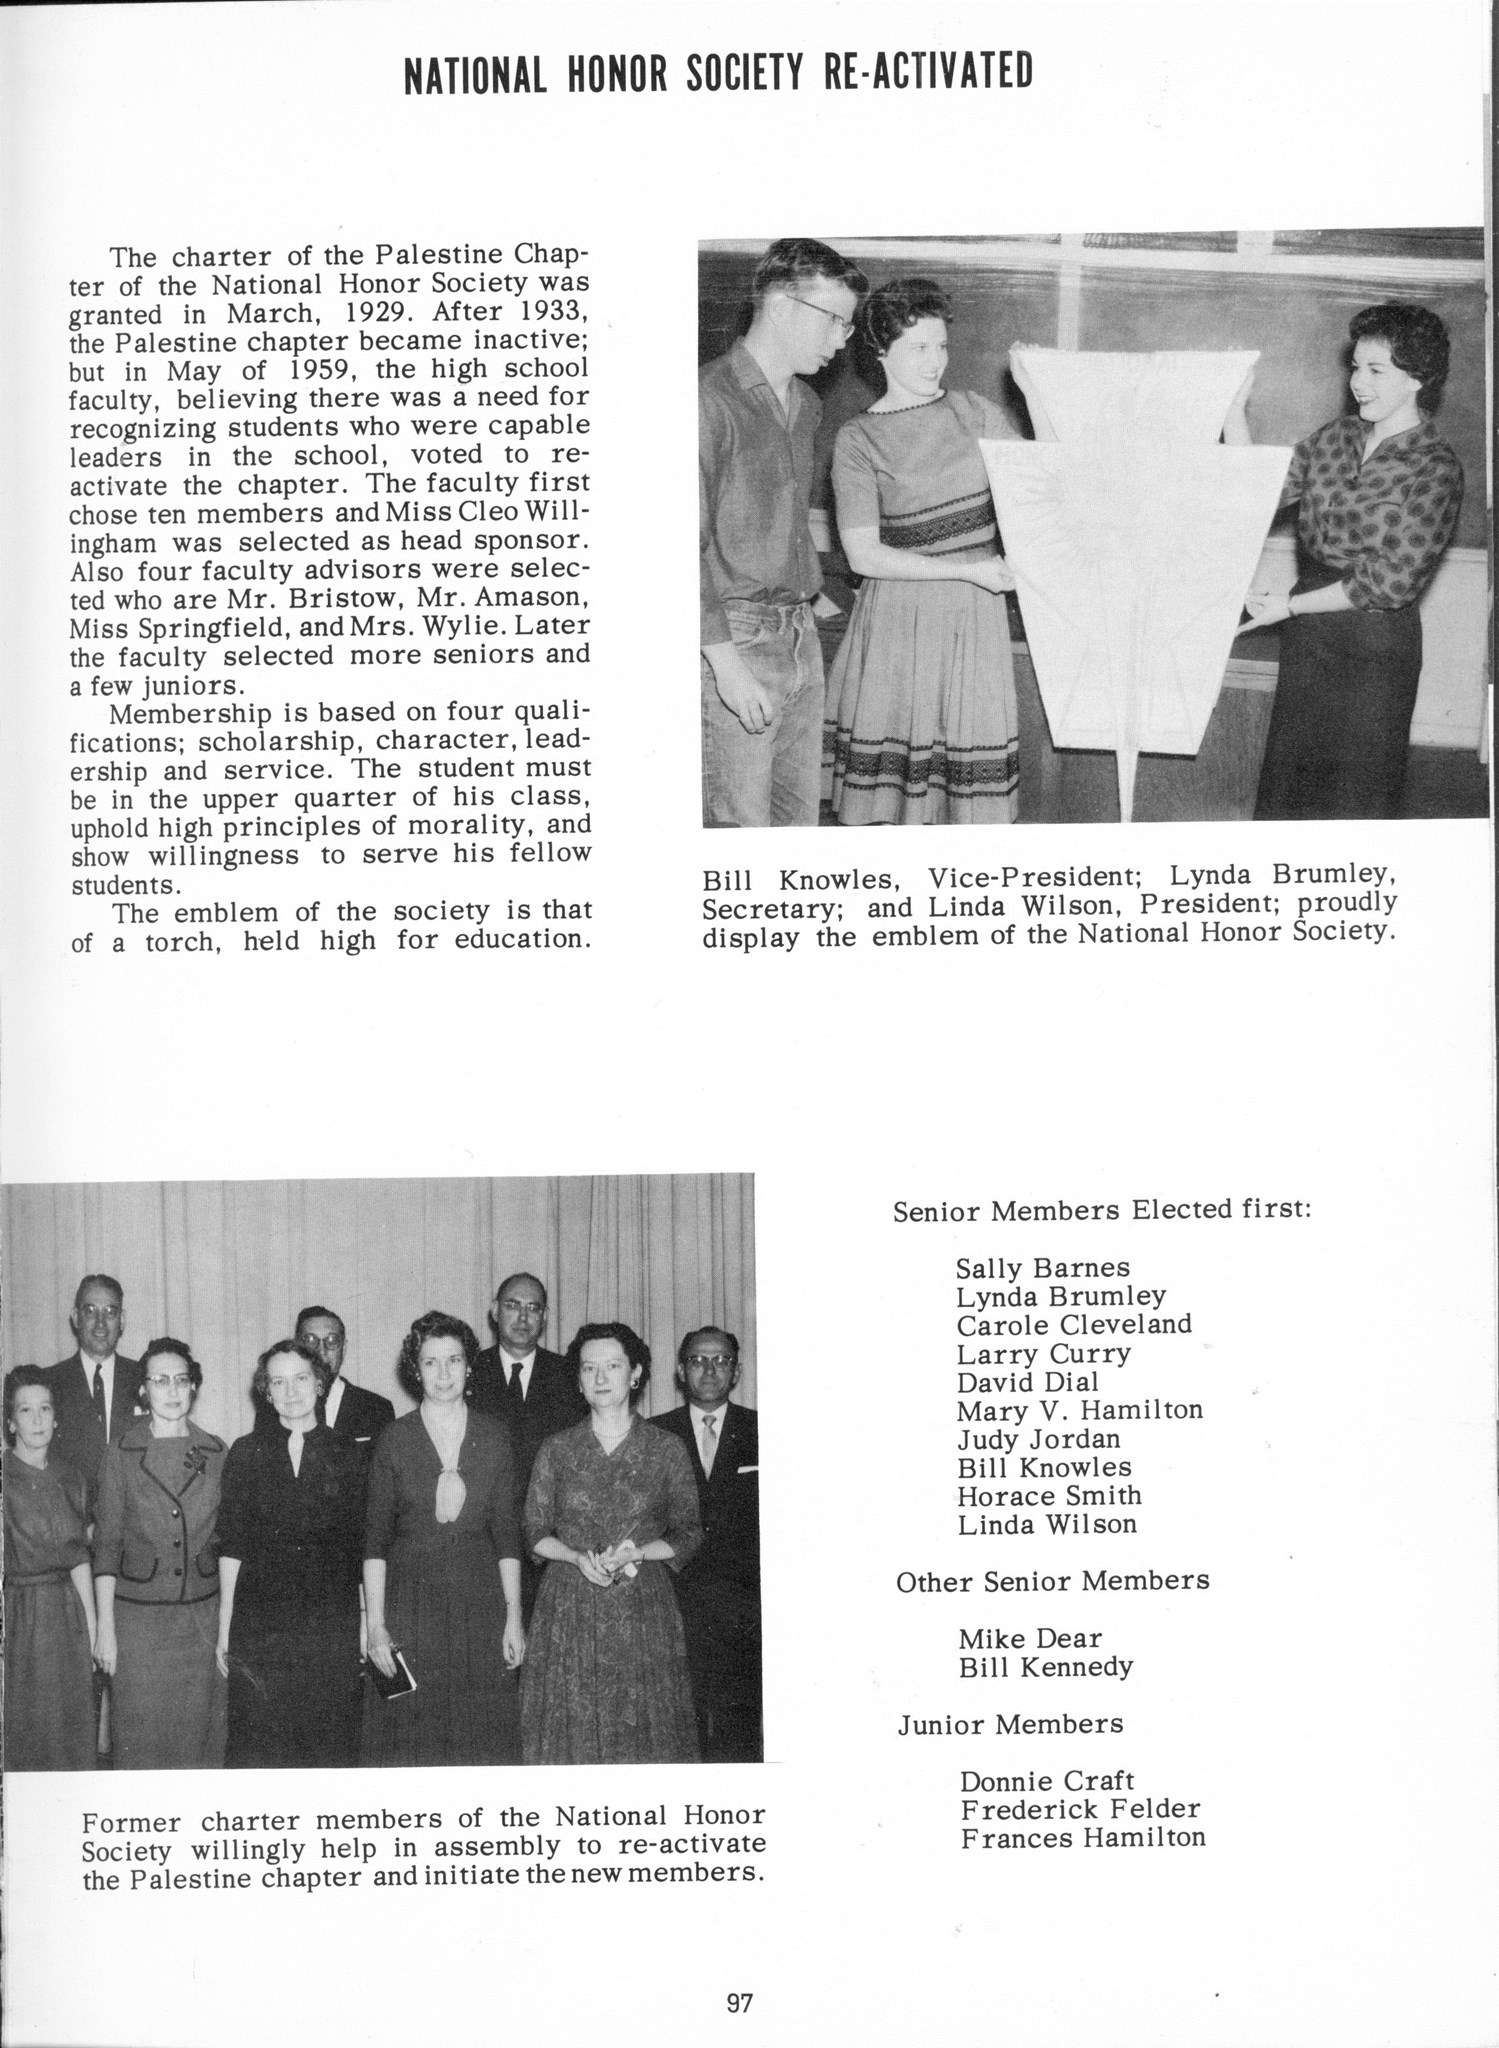 ../../../Images/Large/1960/Arclight-1960-pg0097.jpg